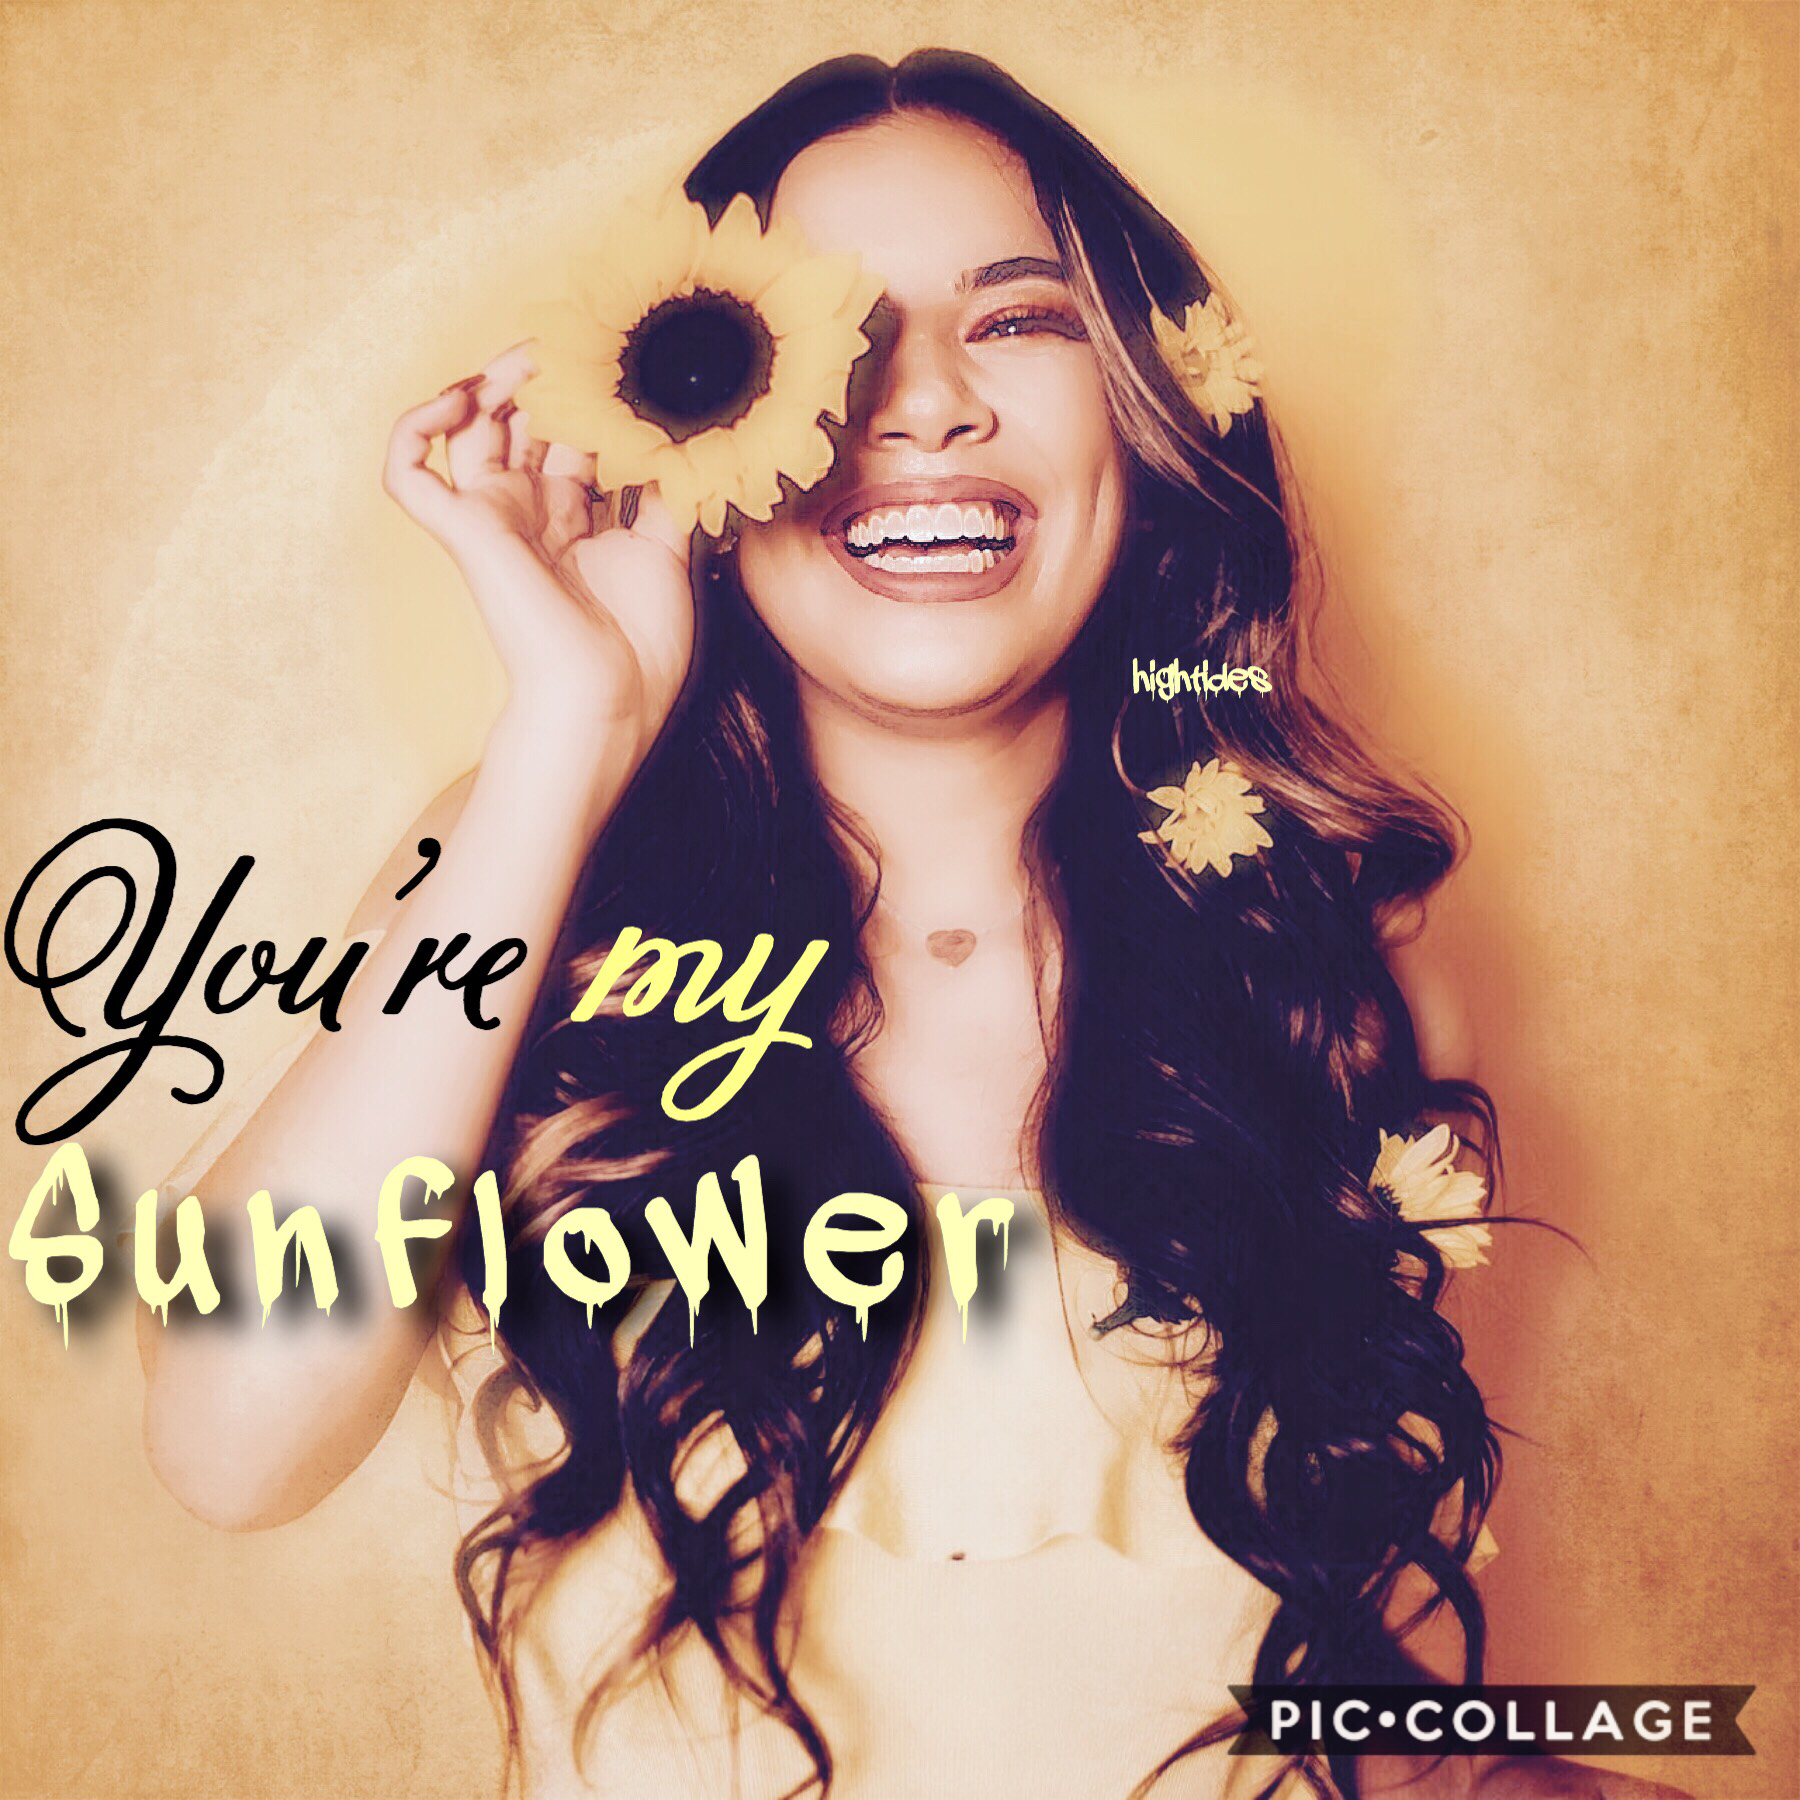 🌻Tap🌻

Sorry for being inactive!

Hope you like this!!!

Love you all! I will try to be more active!

Add me on wattpad @Yo_Makaylah